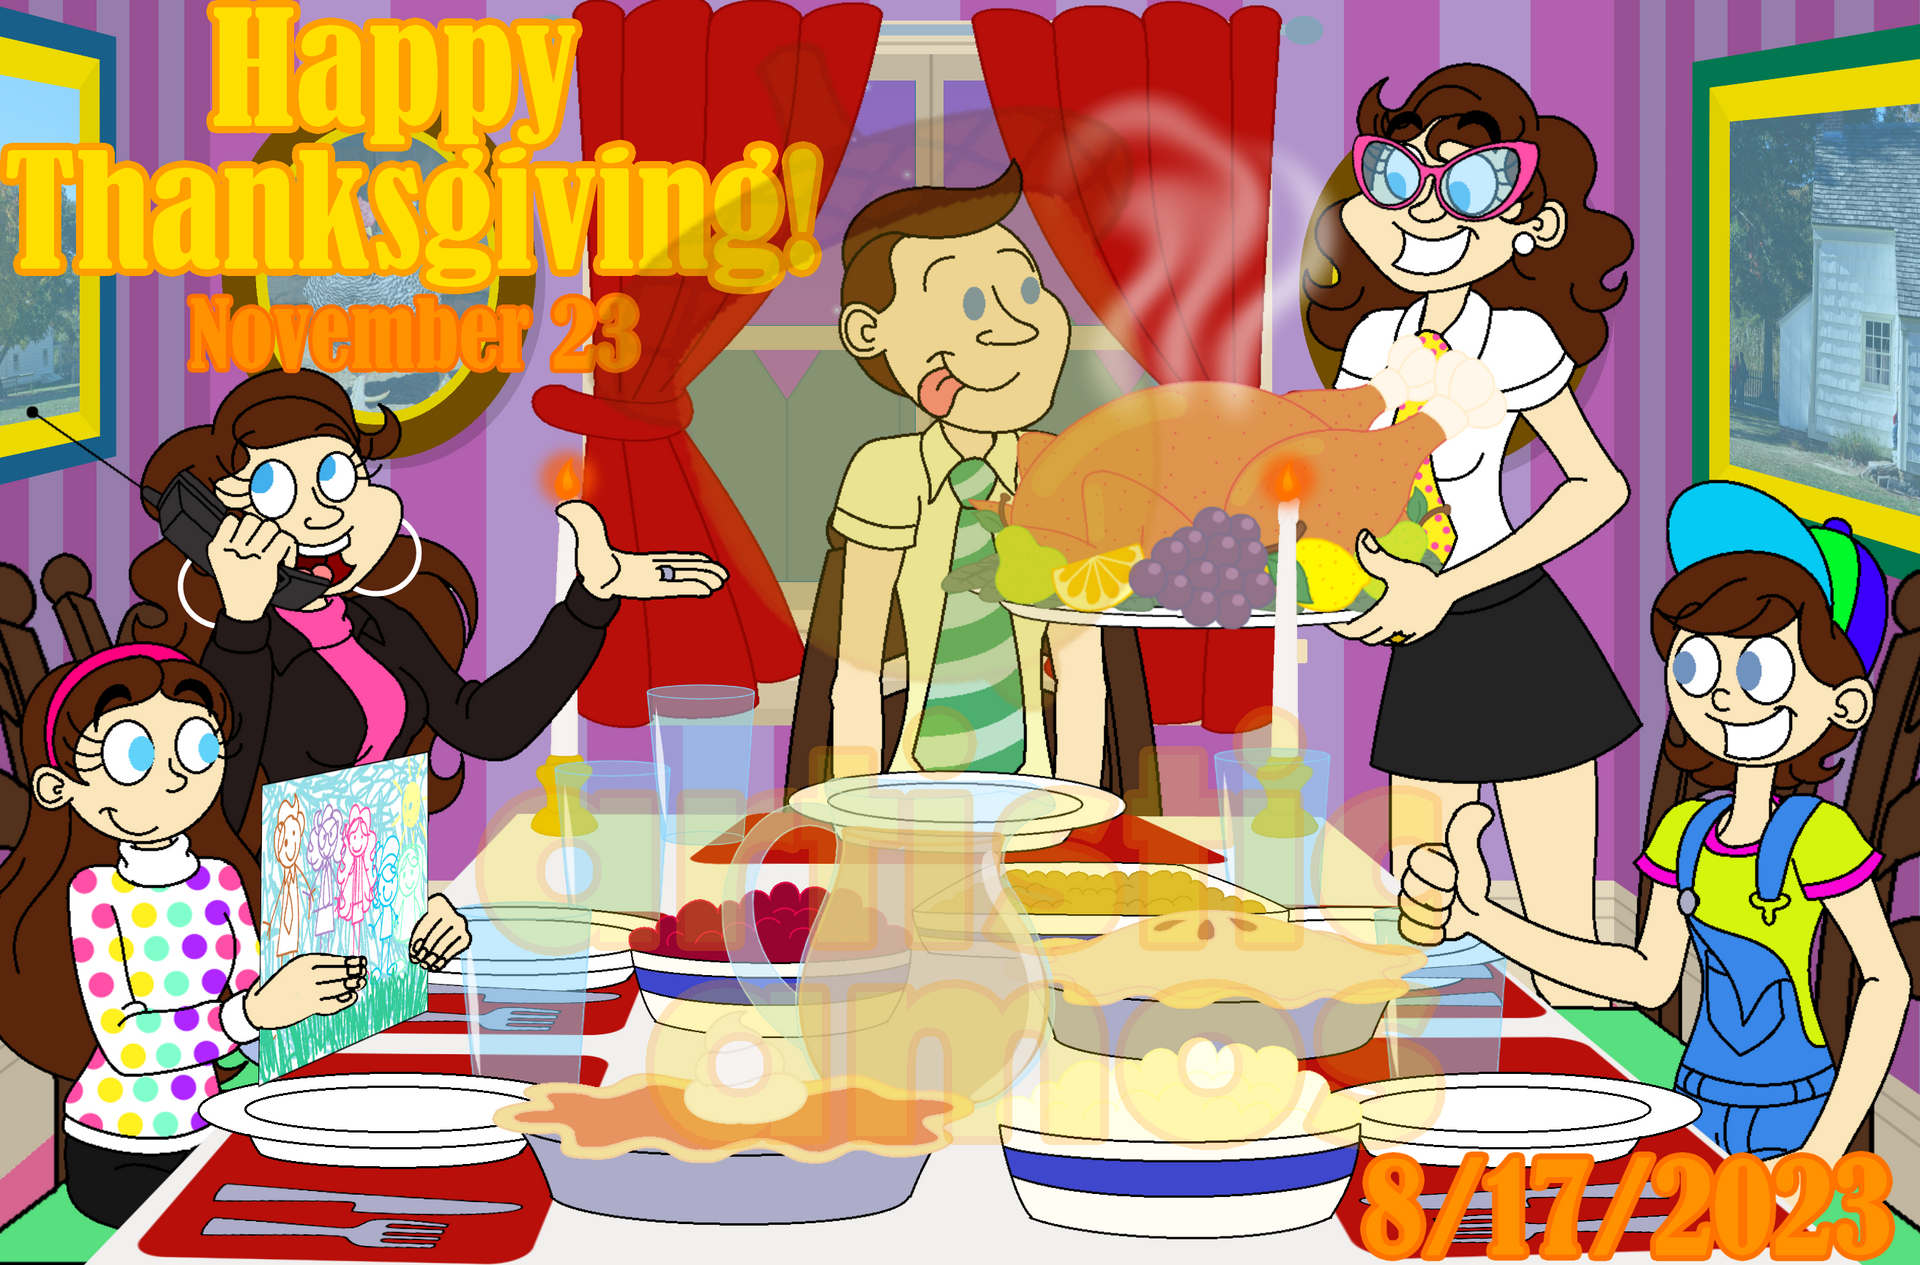 Happy Thanksgiving Day 2023! by AwesomeCraft on DeviantArt